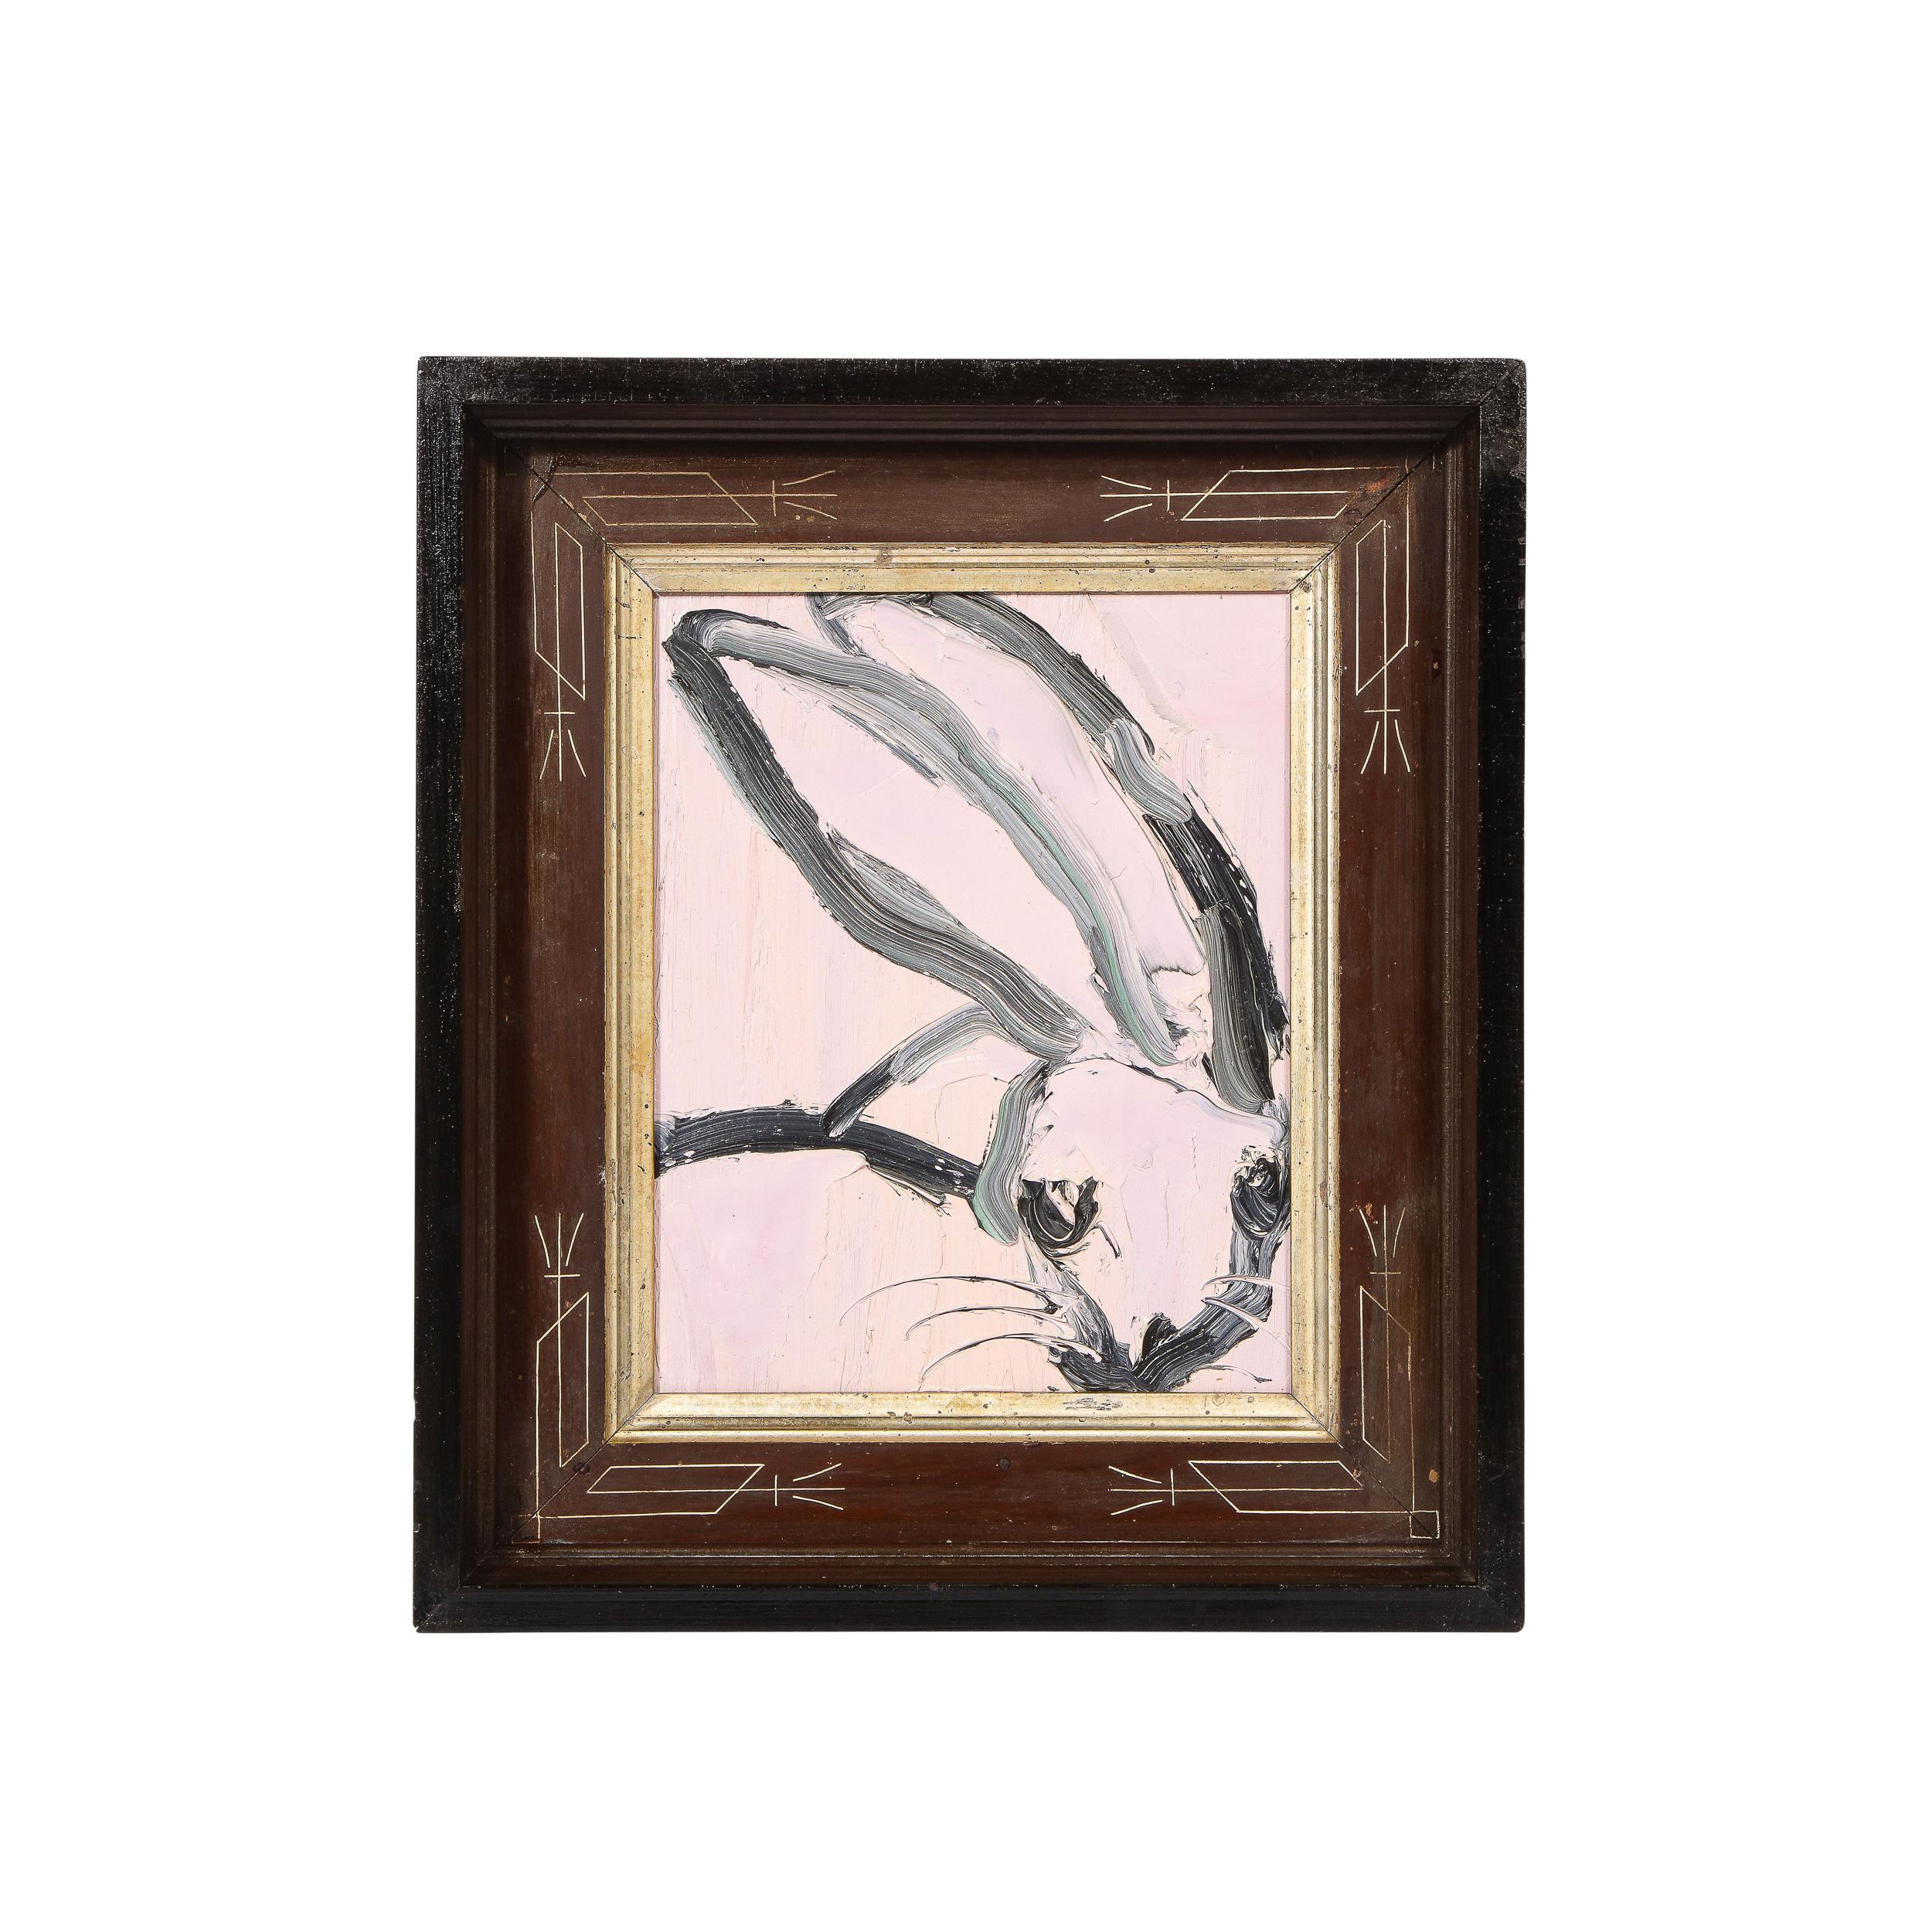 This elegant and whimsical painting was realized by the esteemed contemporary painter, Hunt Slonem in 2015. It presents a stylized bunny rabbit, rendered with loose and expressive brush strokes in black paint against a light gum pink background.